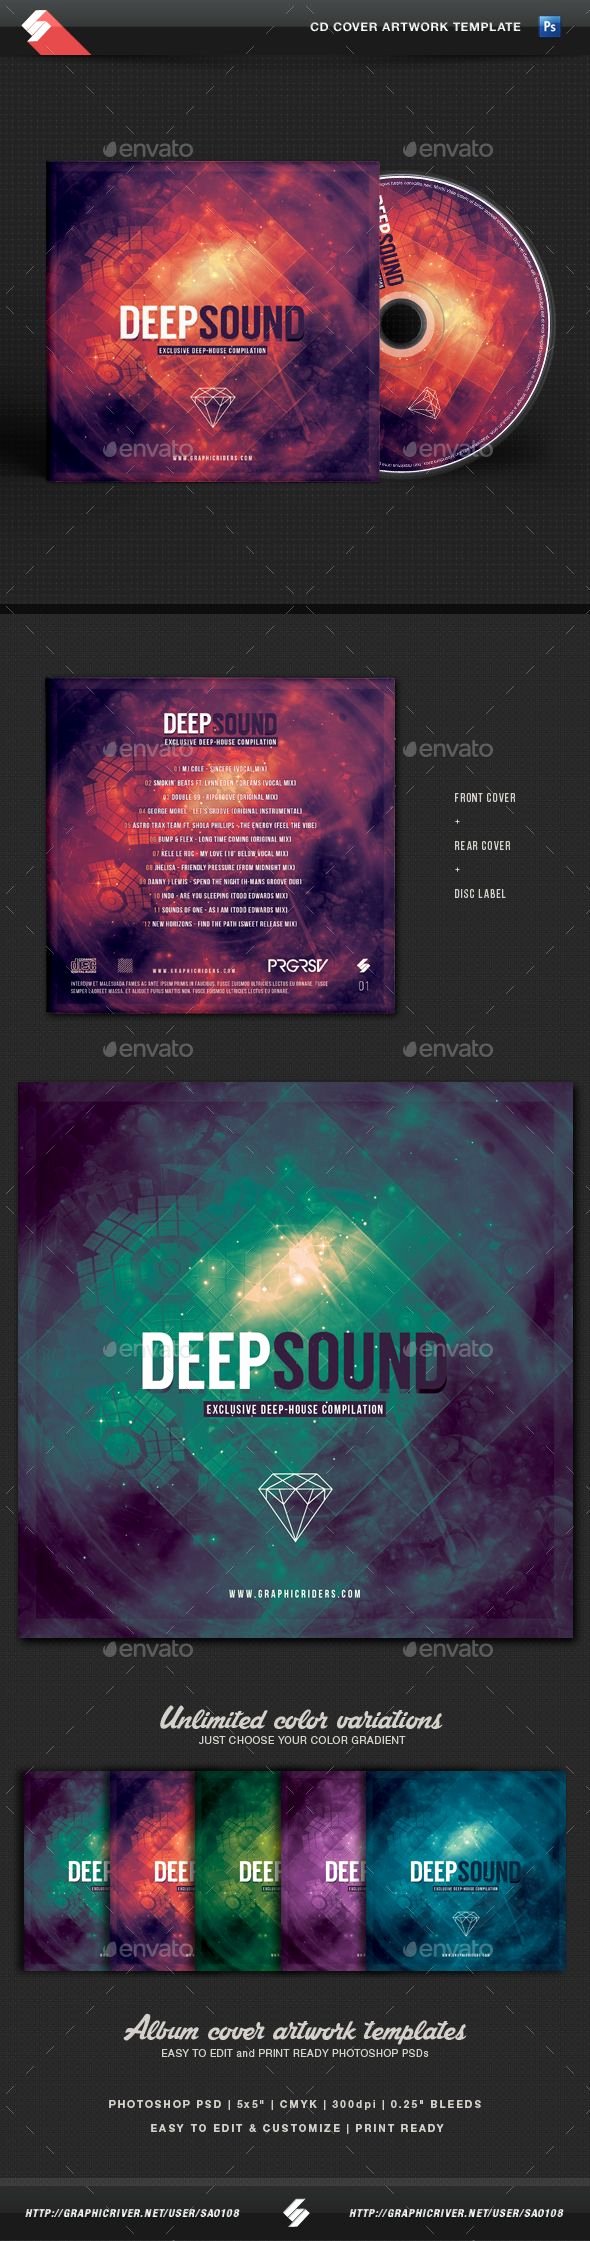 Cd Cover Template Photoshop Best Of 17 Best Ideas About Cd Cover Design On Pinterest